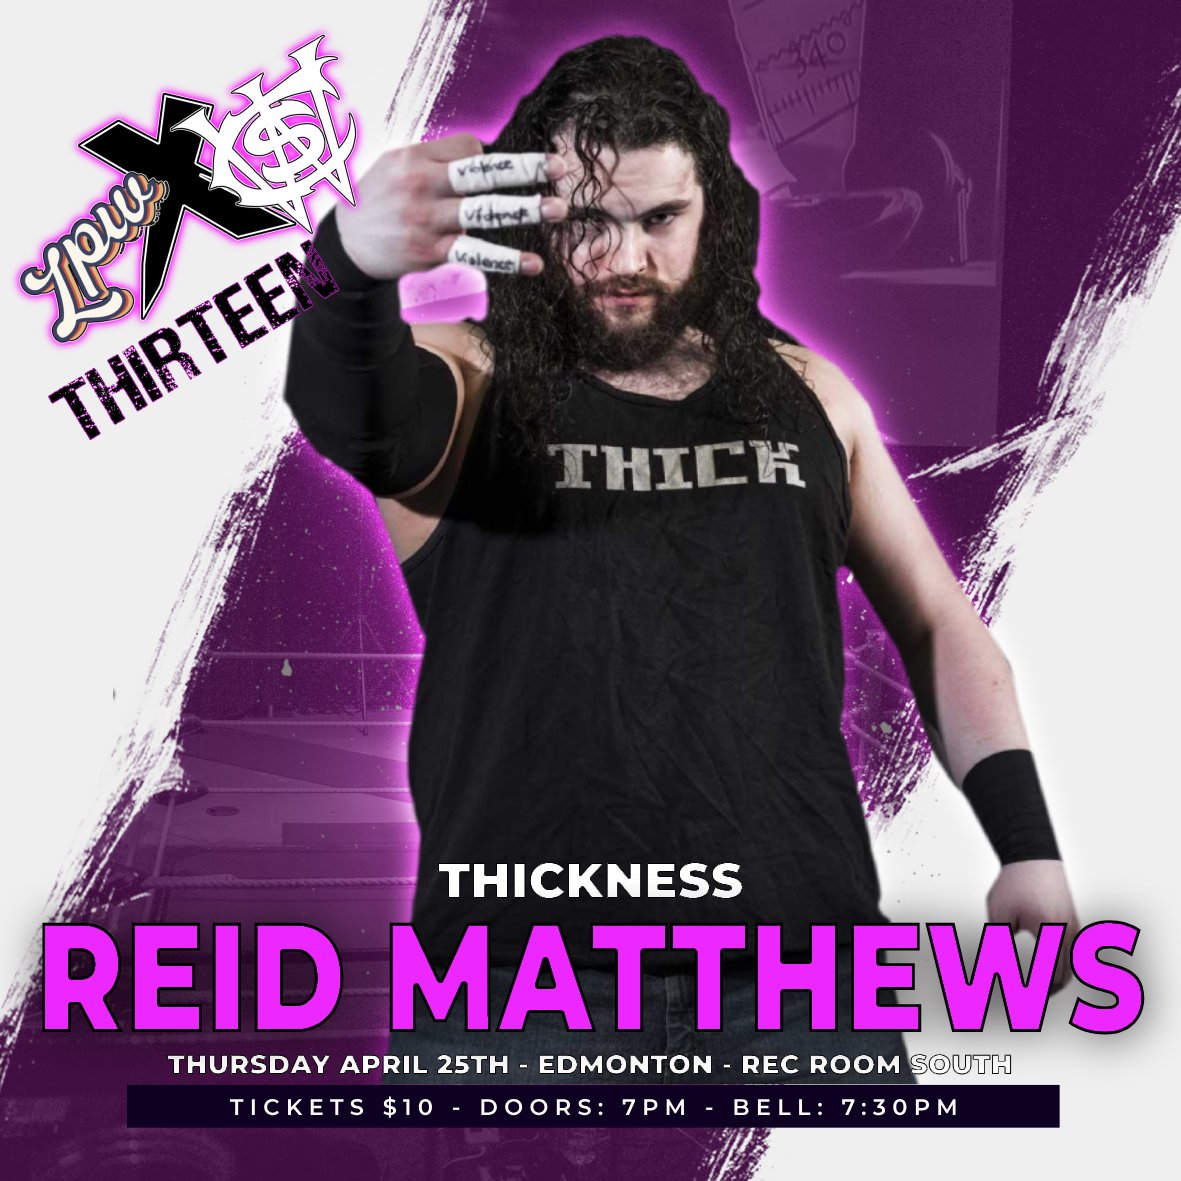 🚨LIVE WRESTLING! EDMONTON!🚨 LPWxCWS #13 - A PREQUEL TO LPW25 THURSDAY! APRIL 25TH! AT THE REC ROOM SOUTH! FEATURING THICK AND VIOLENT REID MATTHEWS TICKETS AVAILABLE IN ADVANCE AT THE LINK OR AT THE DOOR FOR ONLY $10(+fees)! 🎟️ tixr.com/groups/lovewre… 🎟️ BE THERE! JOIN THE